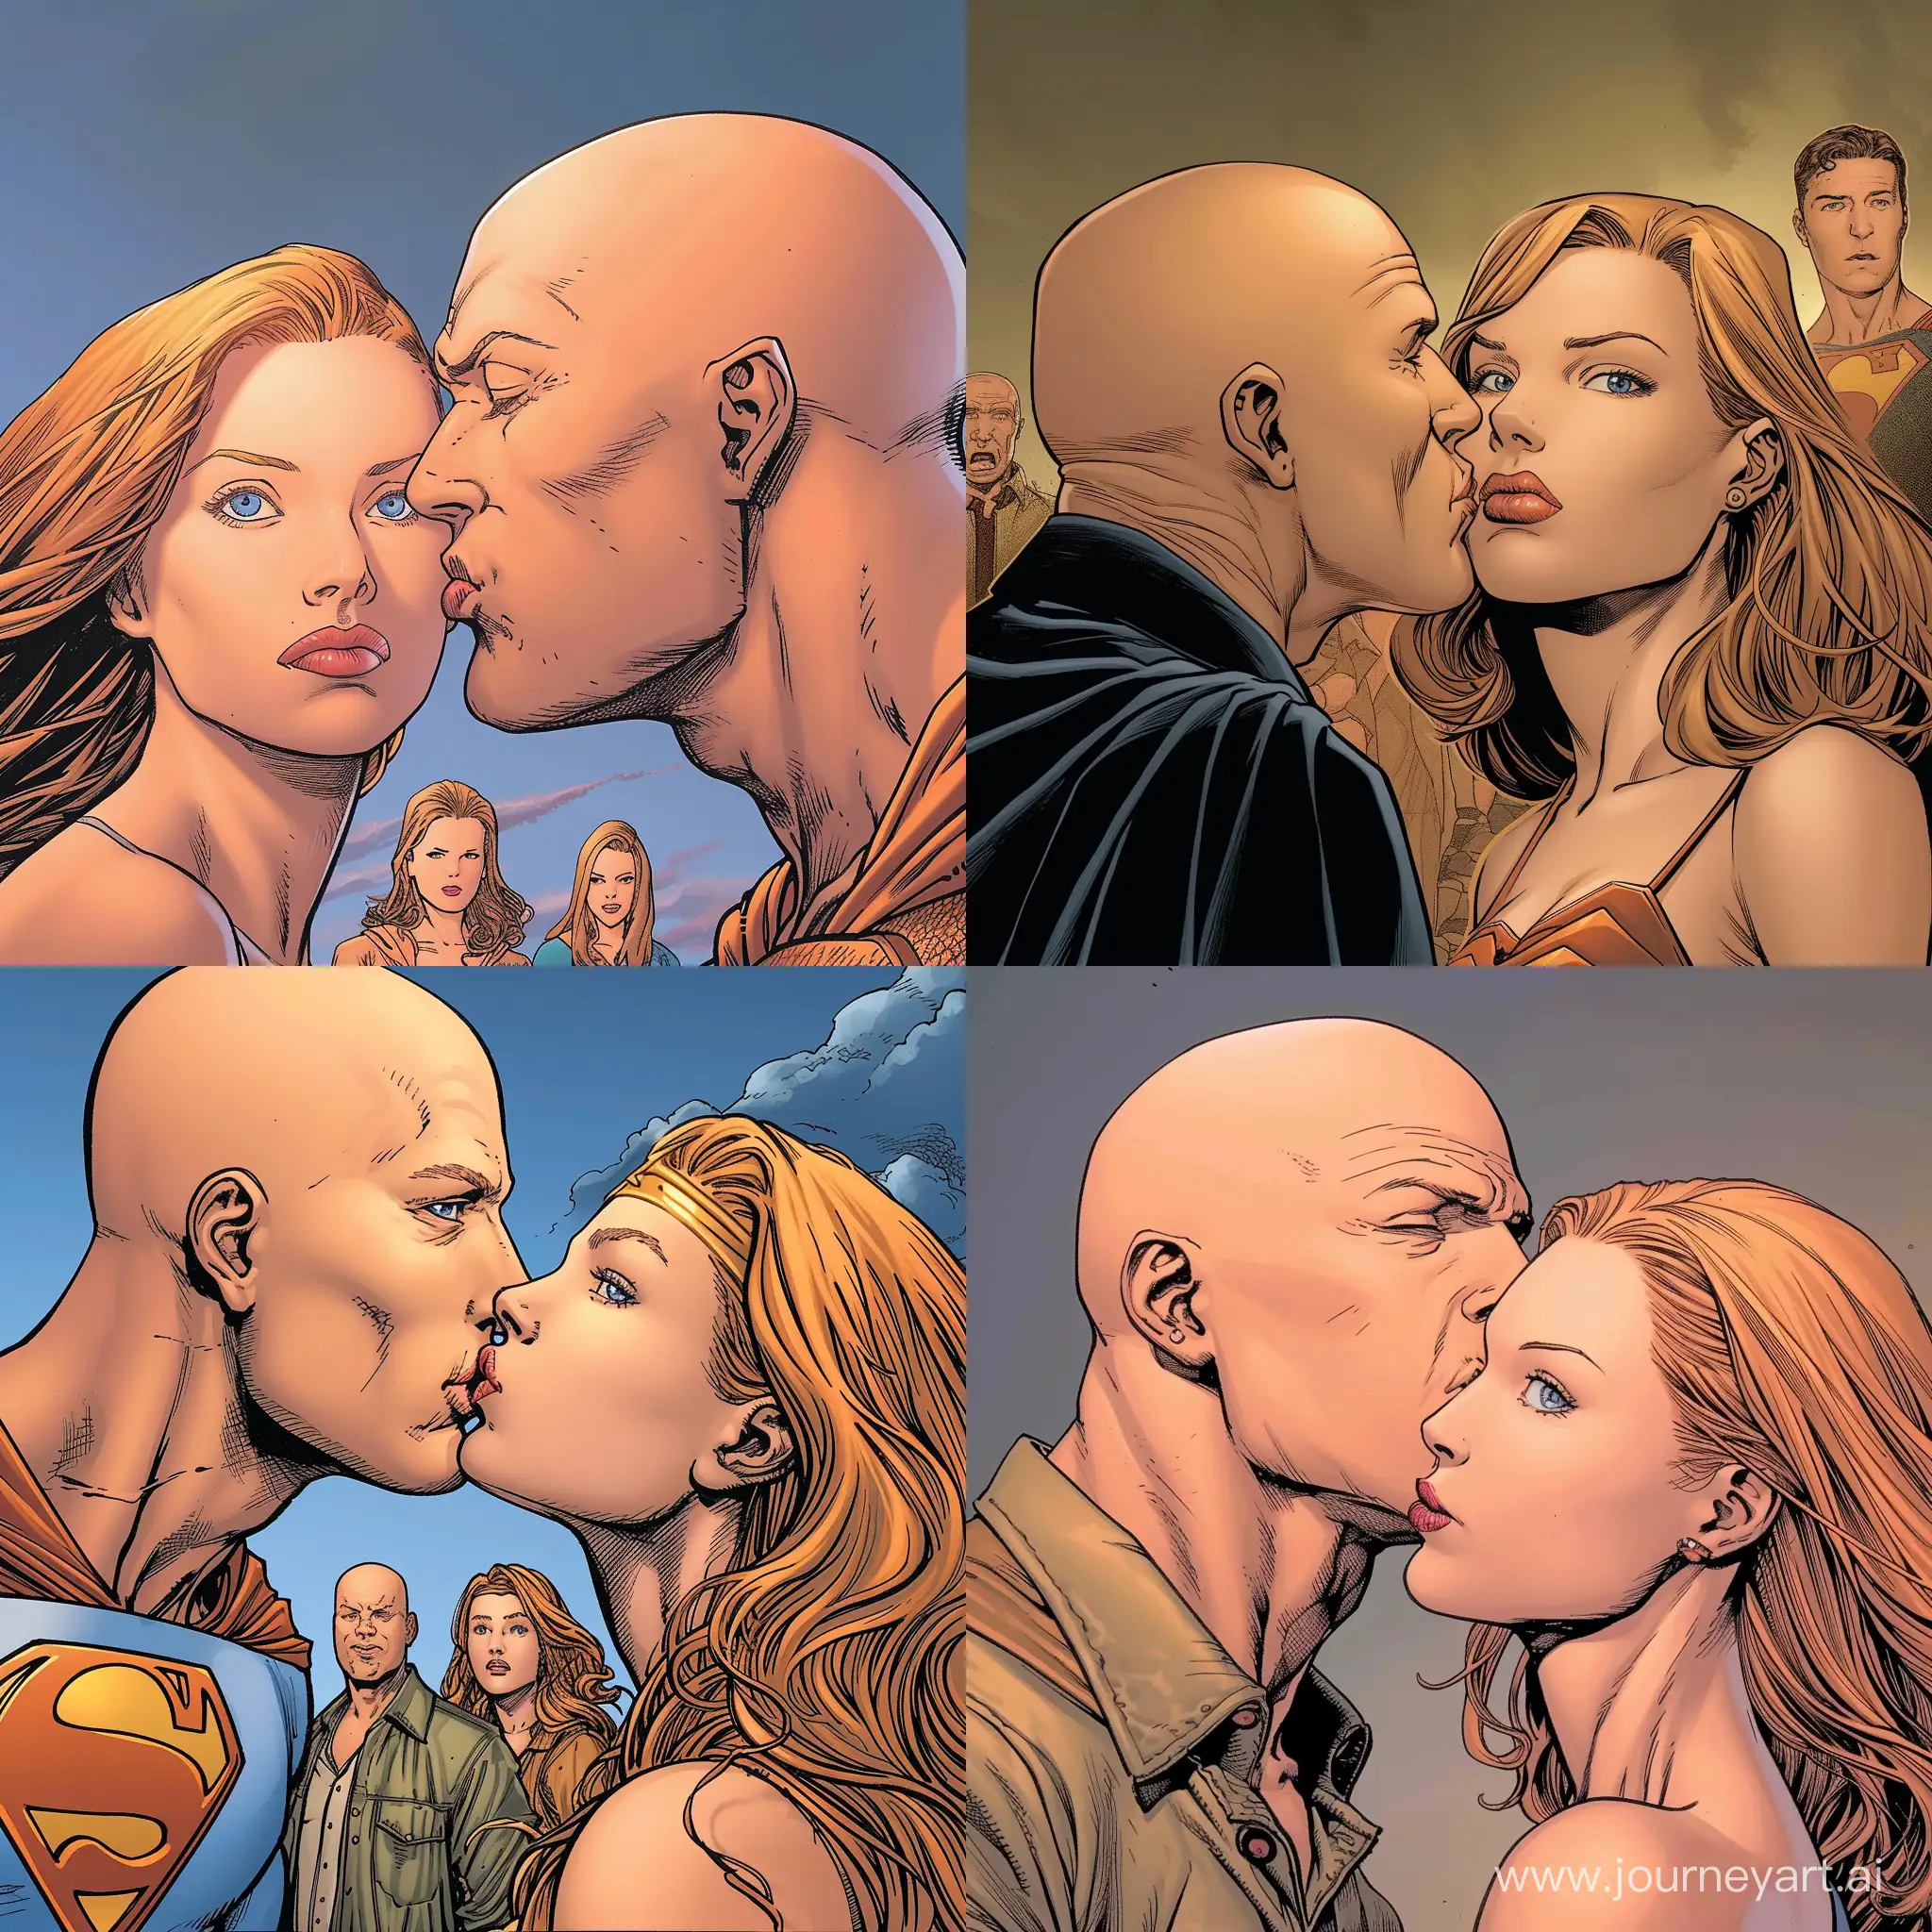 Lex Luthor, portrayed by Michael Rosenbaum, bald kissing a woman . The woman has a light-medium golden complexion, a squared face shape, full lips, blue eyes, dirty blonde eyebrows arched toward the tail, a button nose, and long, straight strawberry blonde hair with wispy bangs. Meanwhile, Martha Kent (Annette O’Toole version), Jonathan Kent (John Schneider version), Clark Kent (Tom Welling version), Lois Lane (Erica Durance version), Chloe Sullivan (Allison Mack version), and Kara Zor-El (Laura Vandervoort version) are all watching in horror.